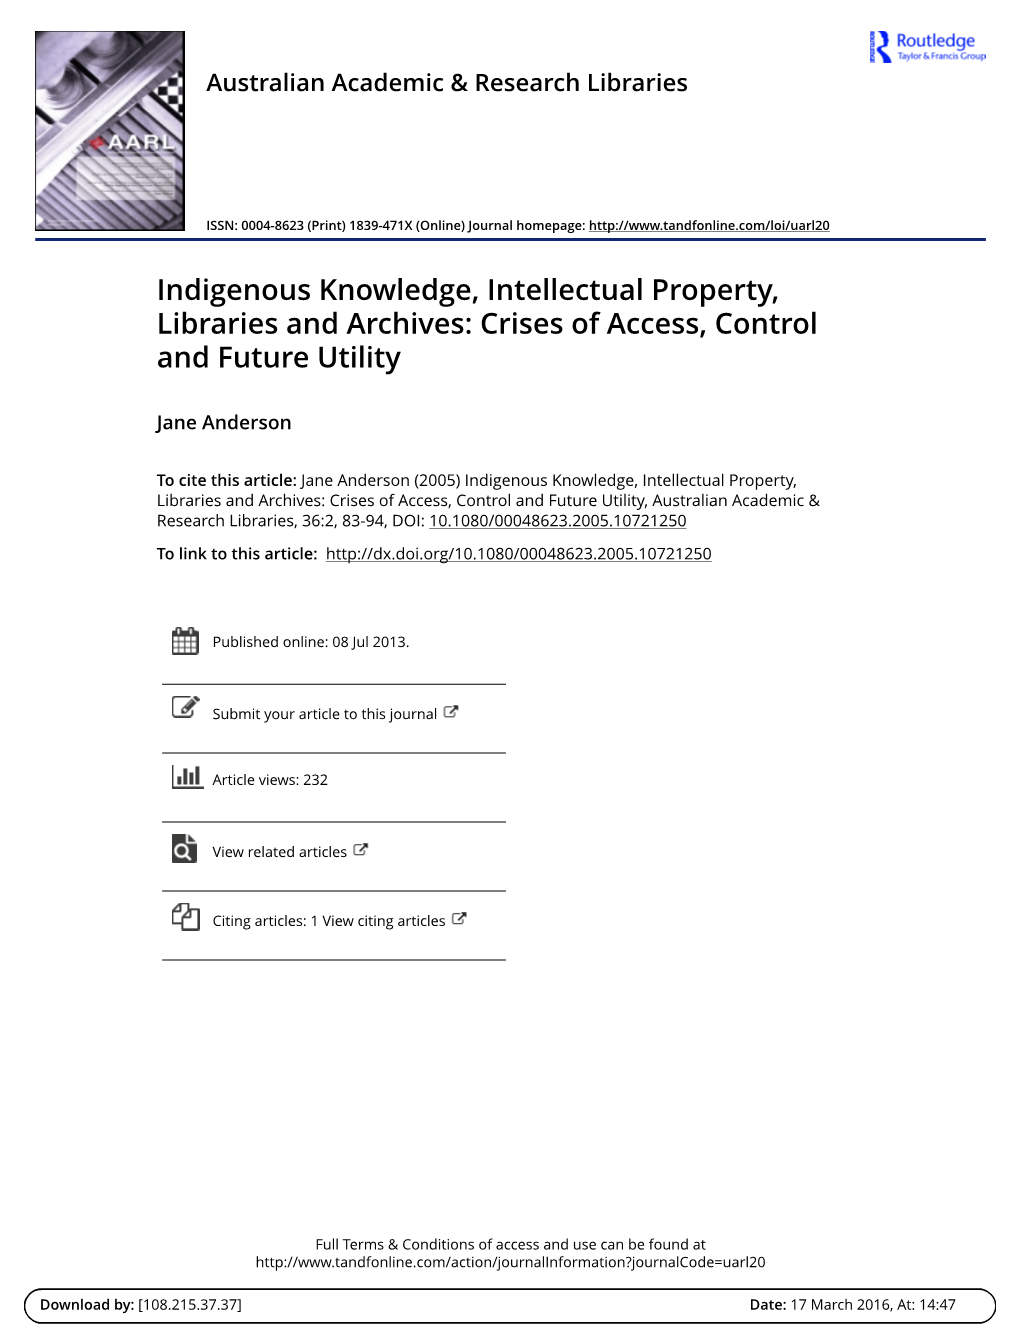 Indigenous Knowledge, Intellectual Property, Libraries and Archives: Crises of Access, Control and Future Utility